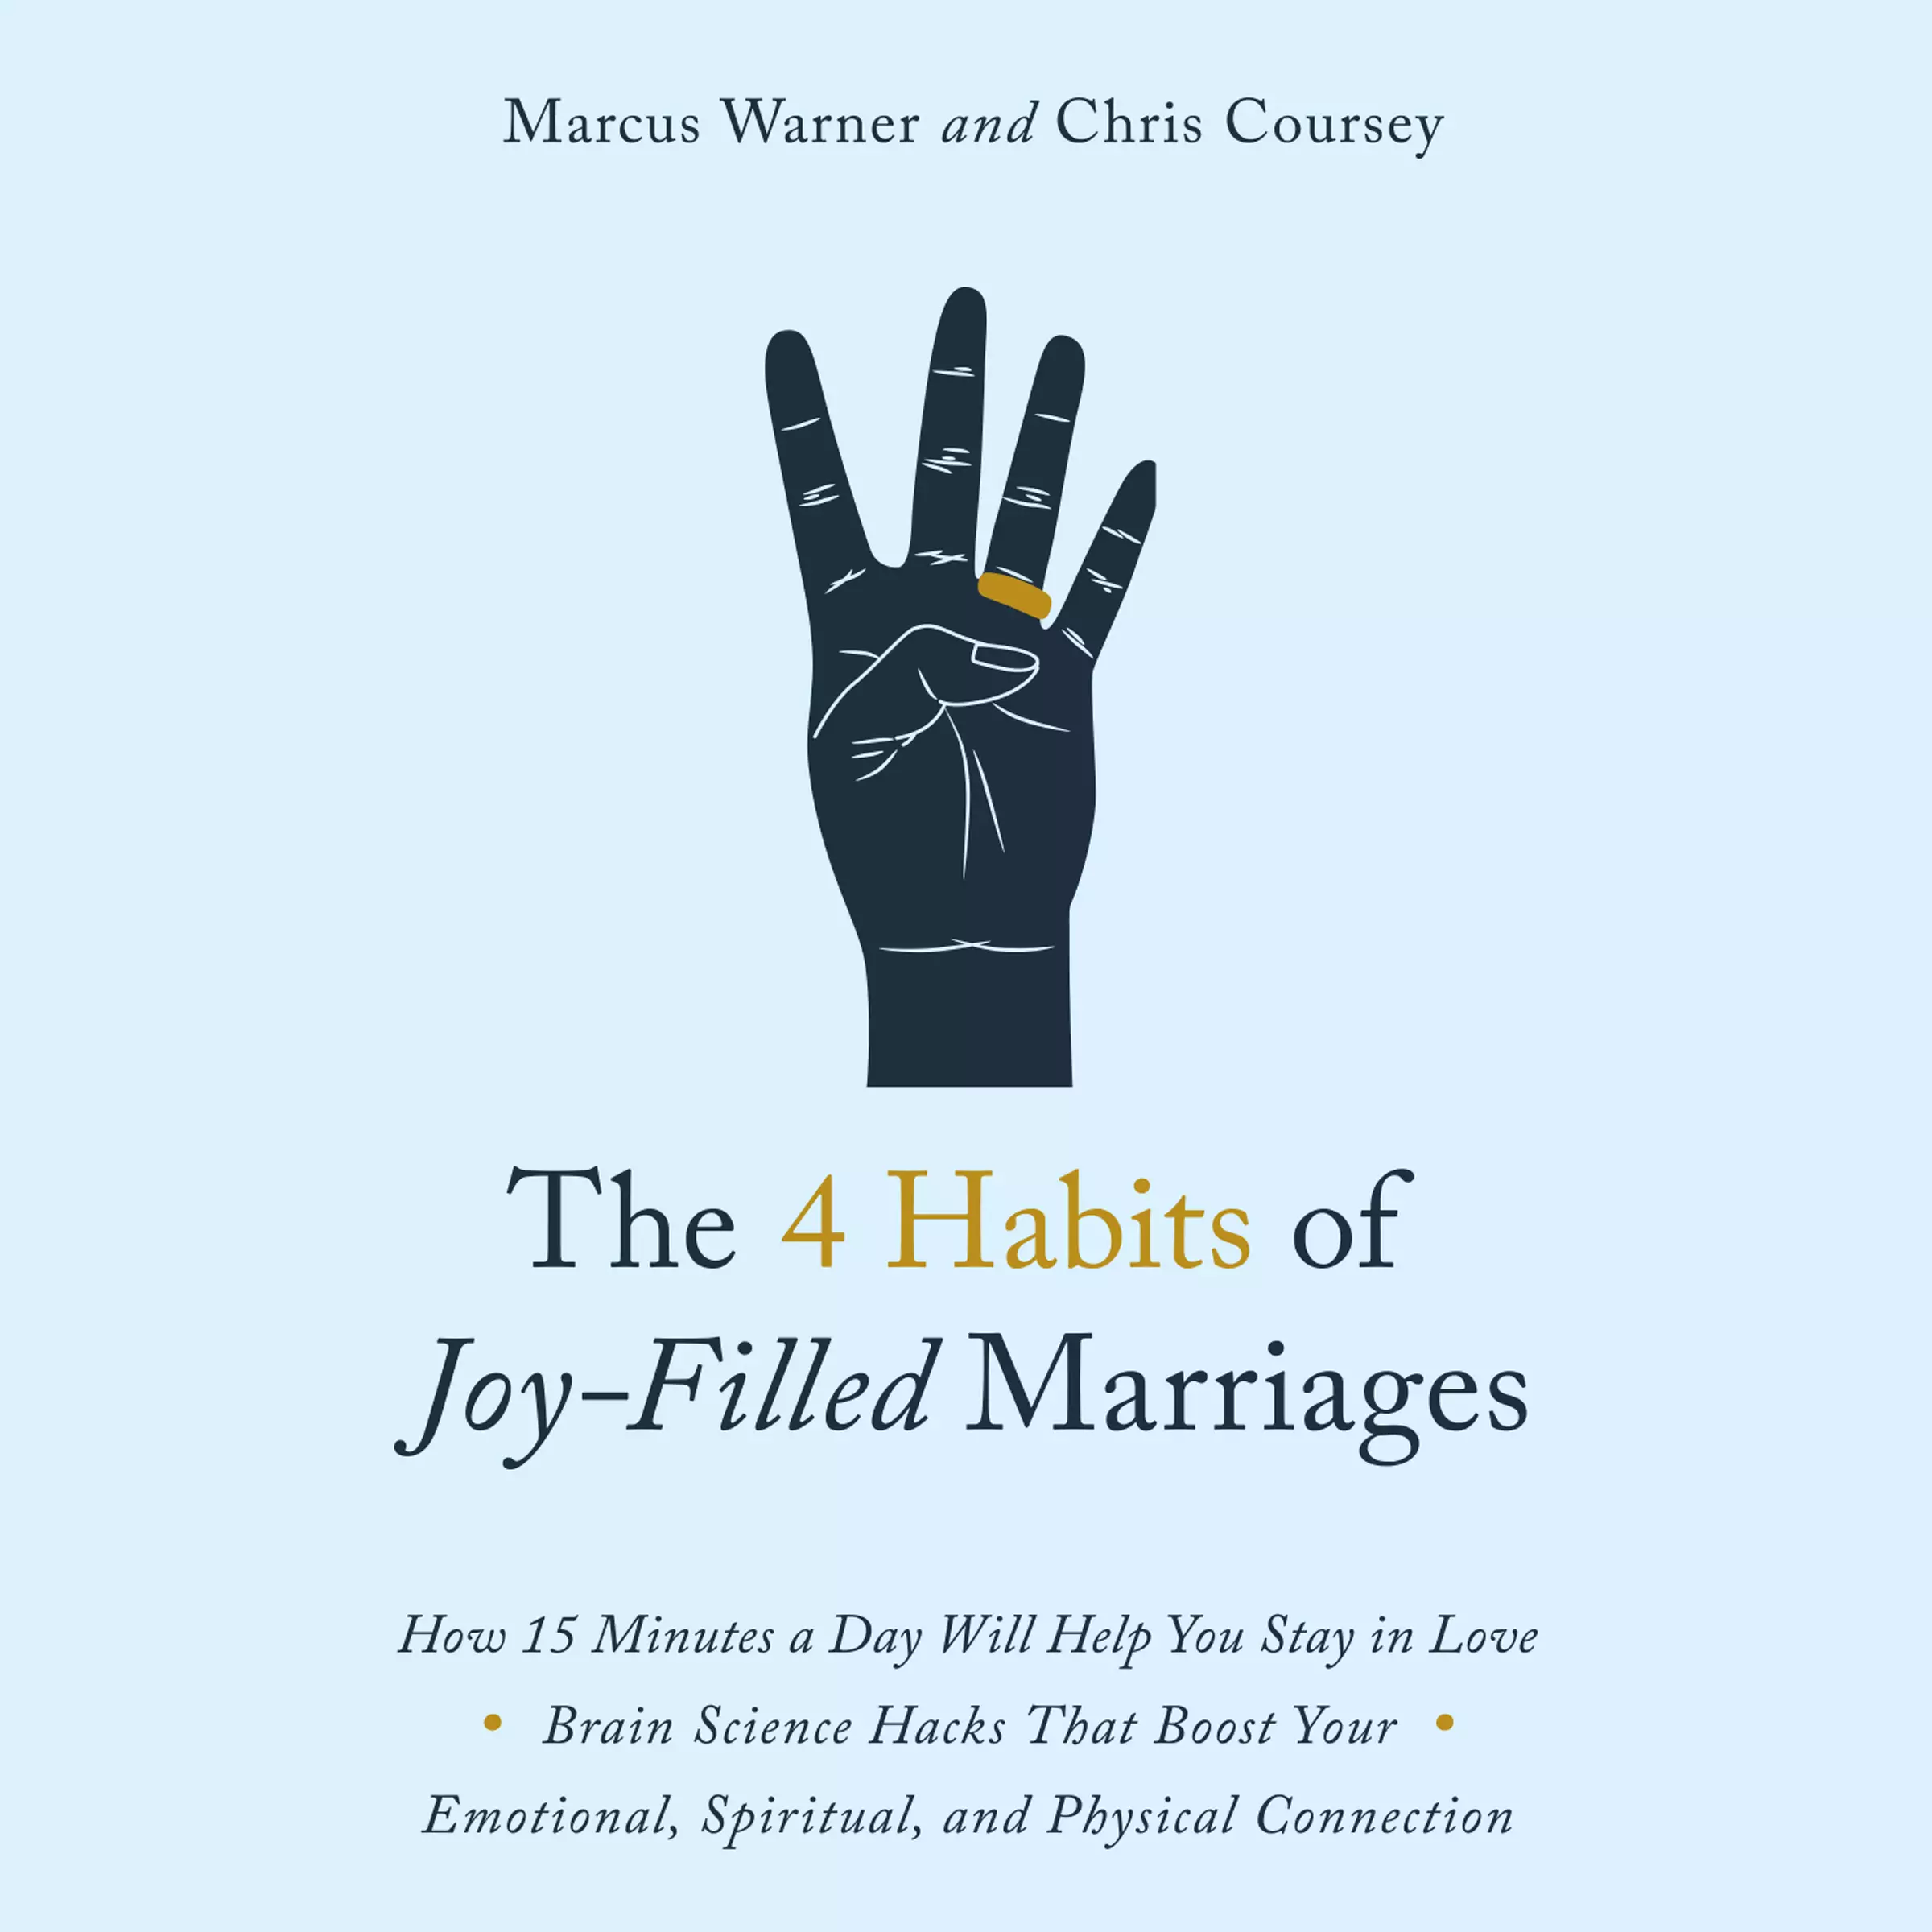 4 Habits of Joy Filled Marriages